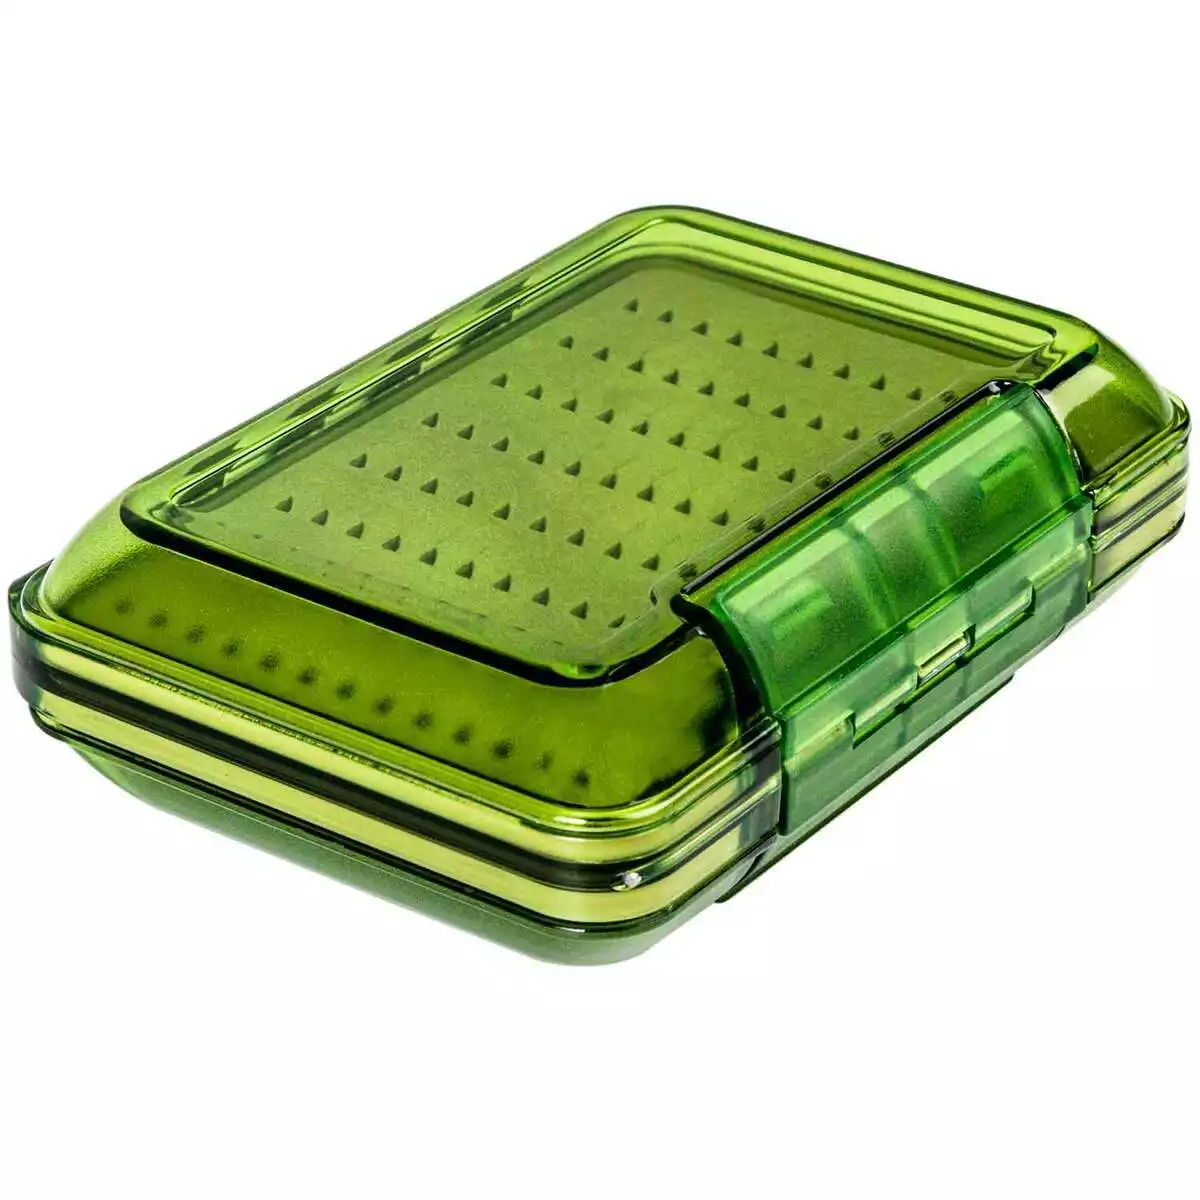 Lost creek double sided polycarbonate fly box